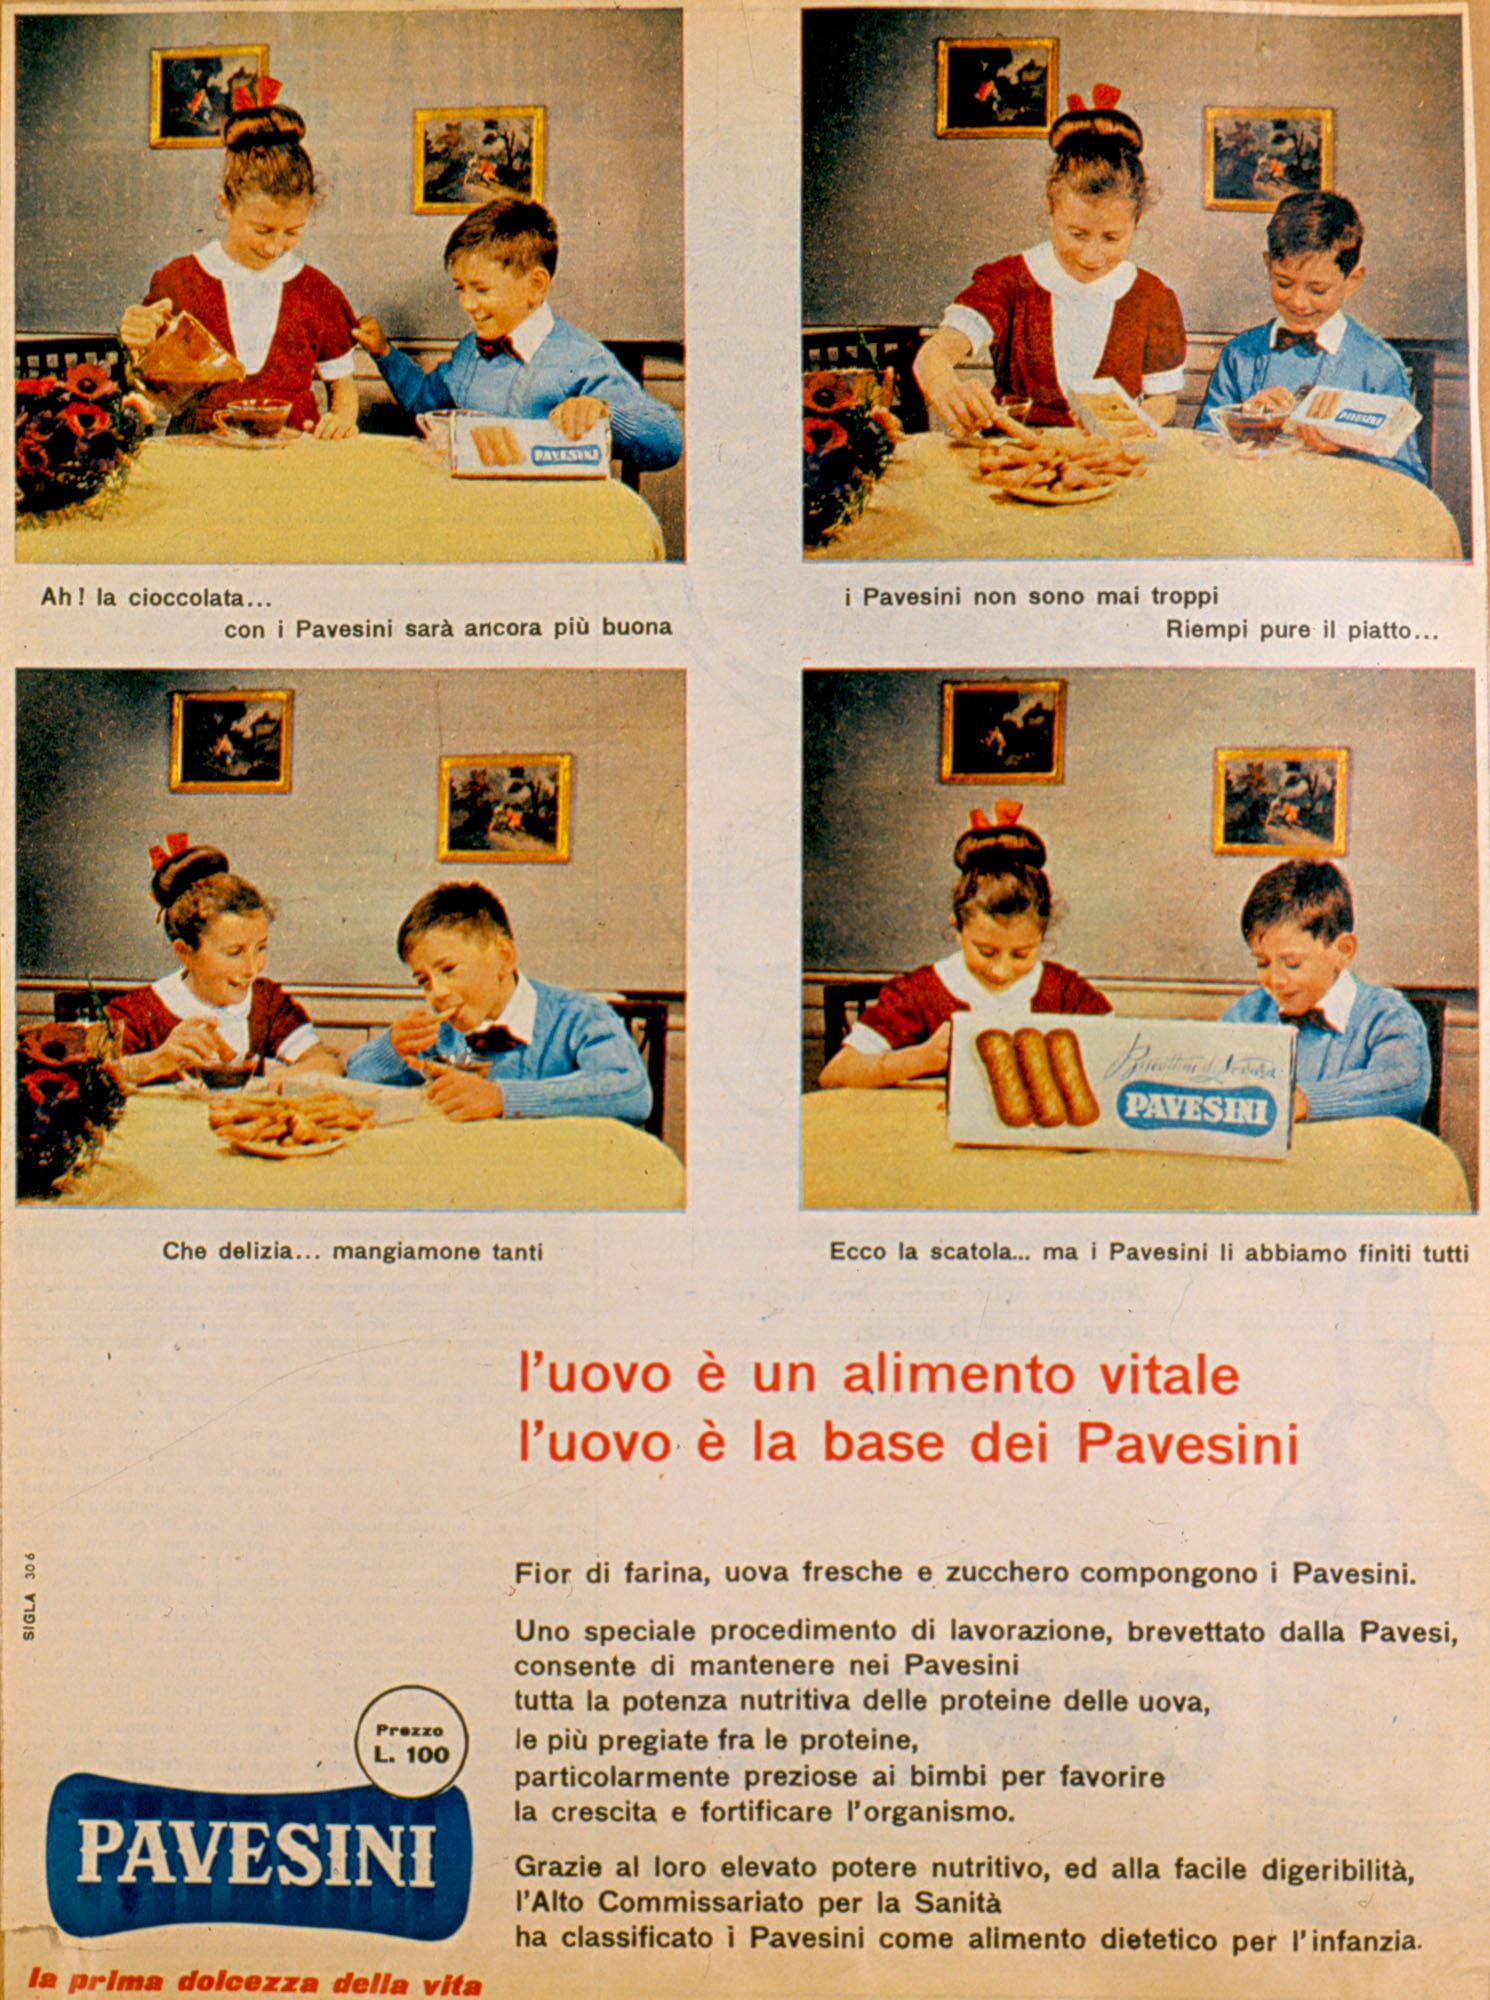 Press advertising - The egg is a vital element. The egg is the base of Pavesini, 1956